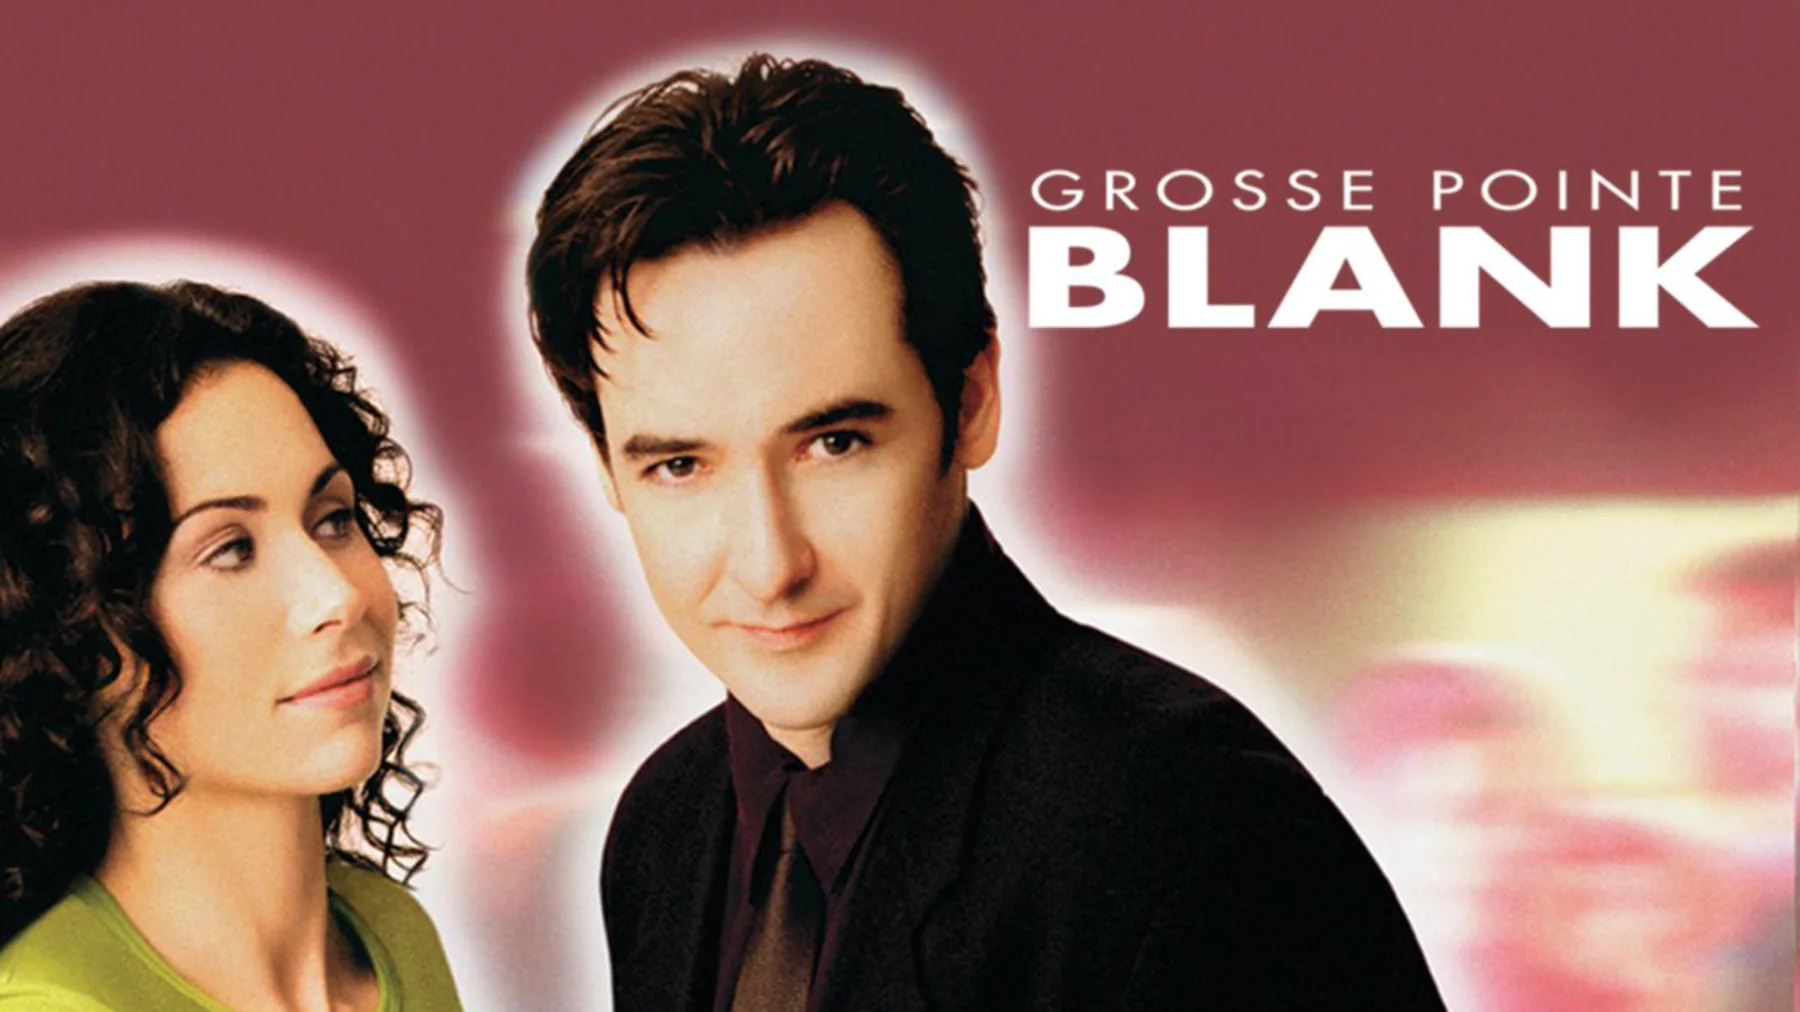 39-facts-about-the-movie-grosse-pointe-blank